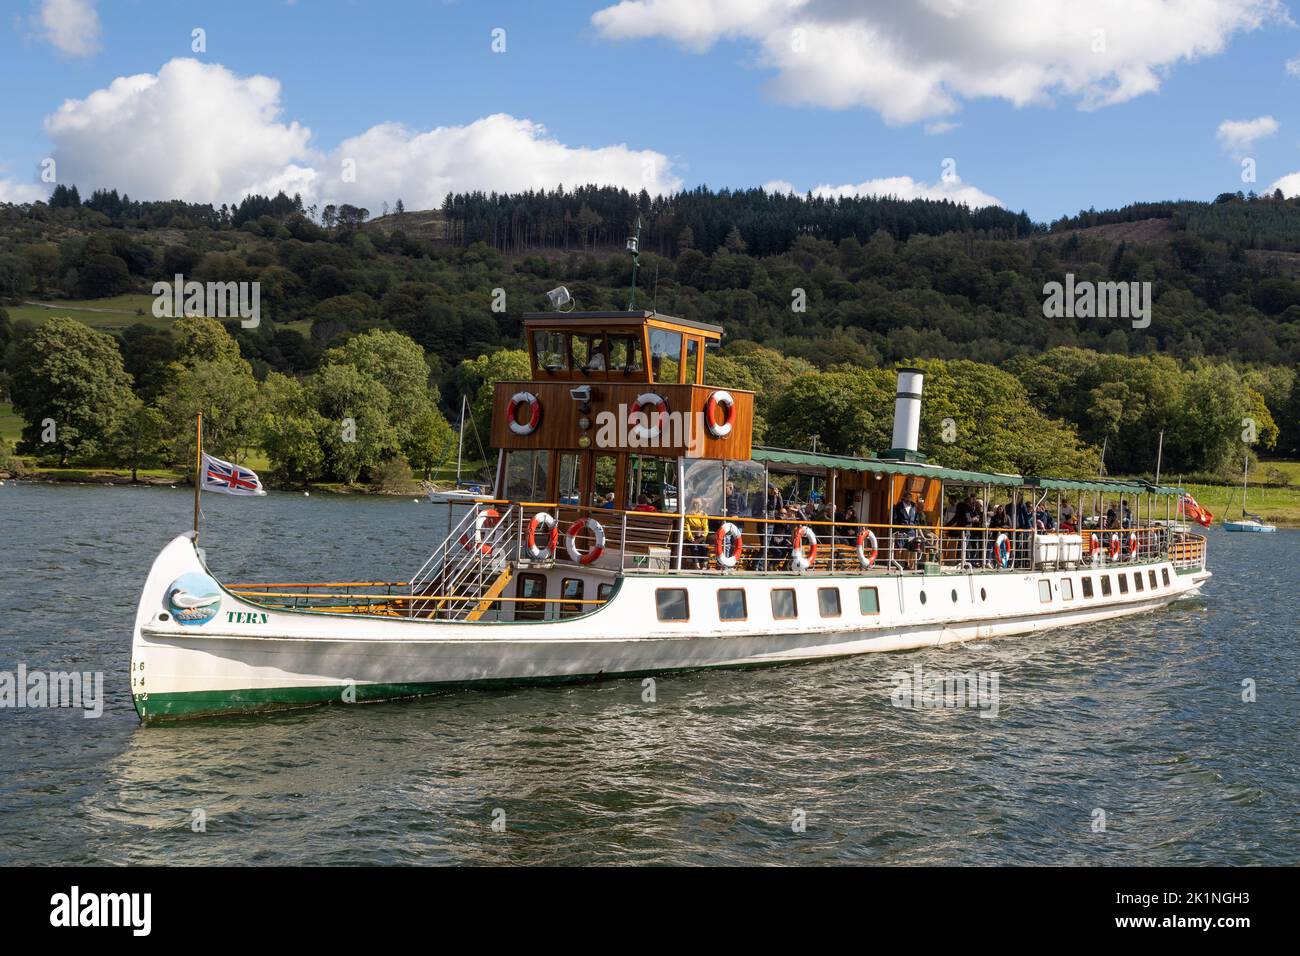 Lakeside, Lake Windermere, Lake District, Cumbria. MV Tern gets ready to dock at lakeside on a sunny Autumn day. Stock Photo